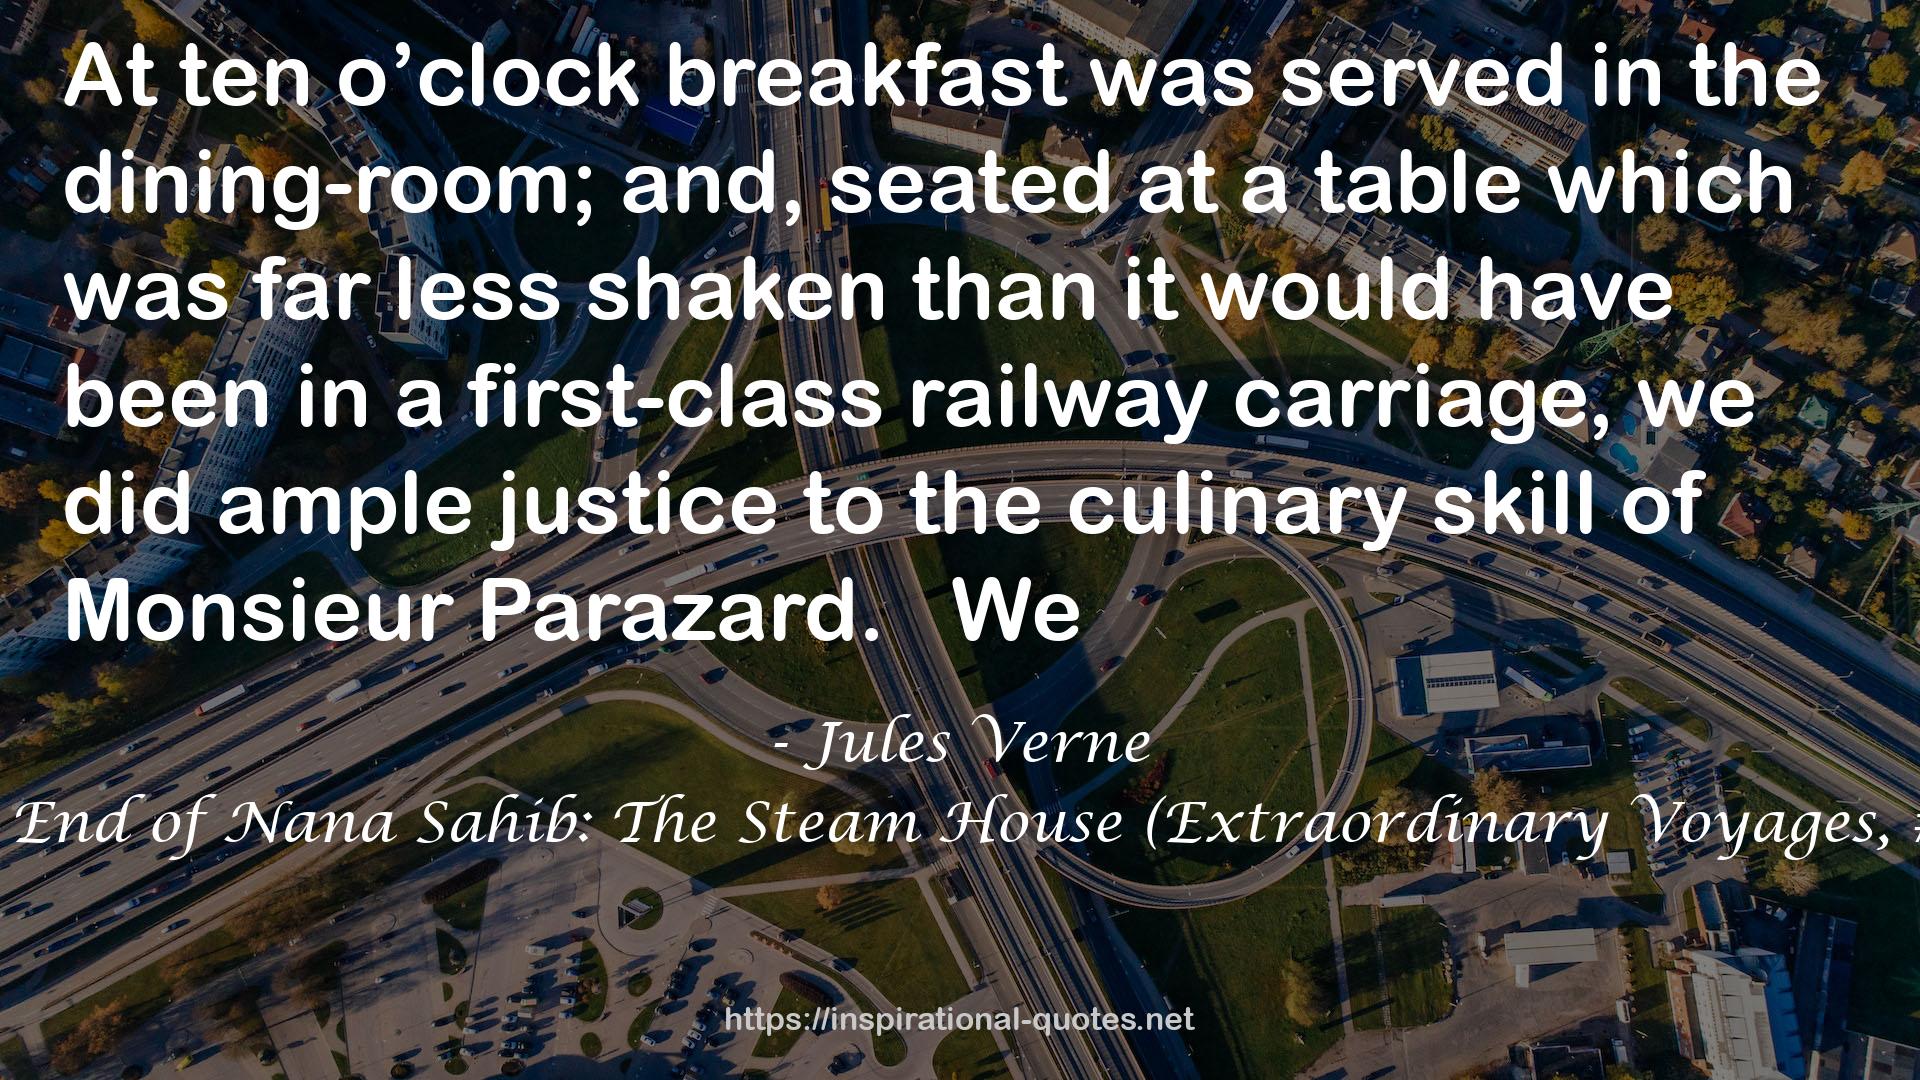 The End of Nana Sahib: The Steam House (Extraordinary Voyages, #20) QUOTES